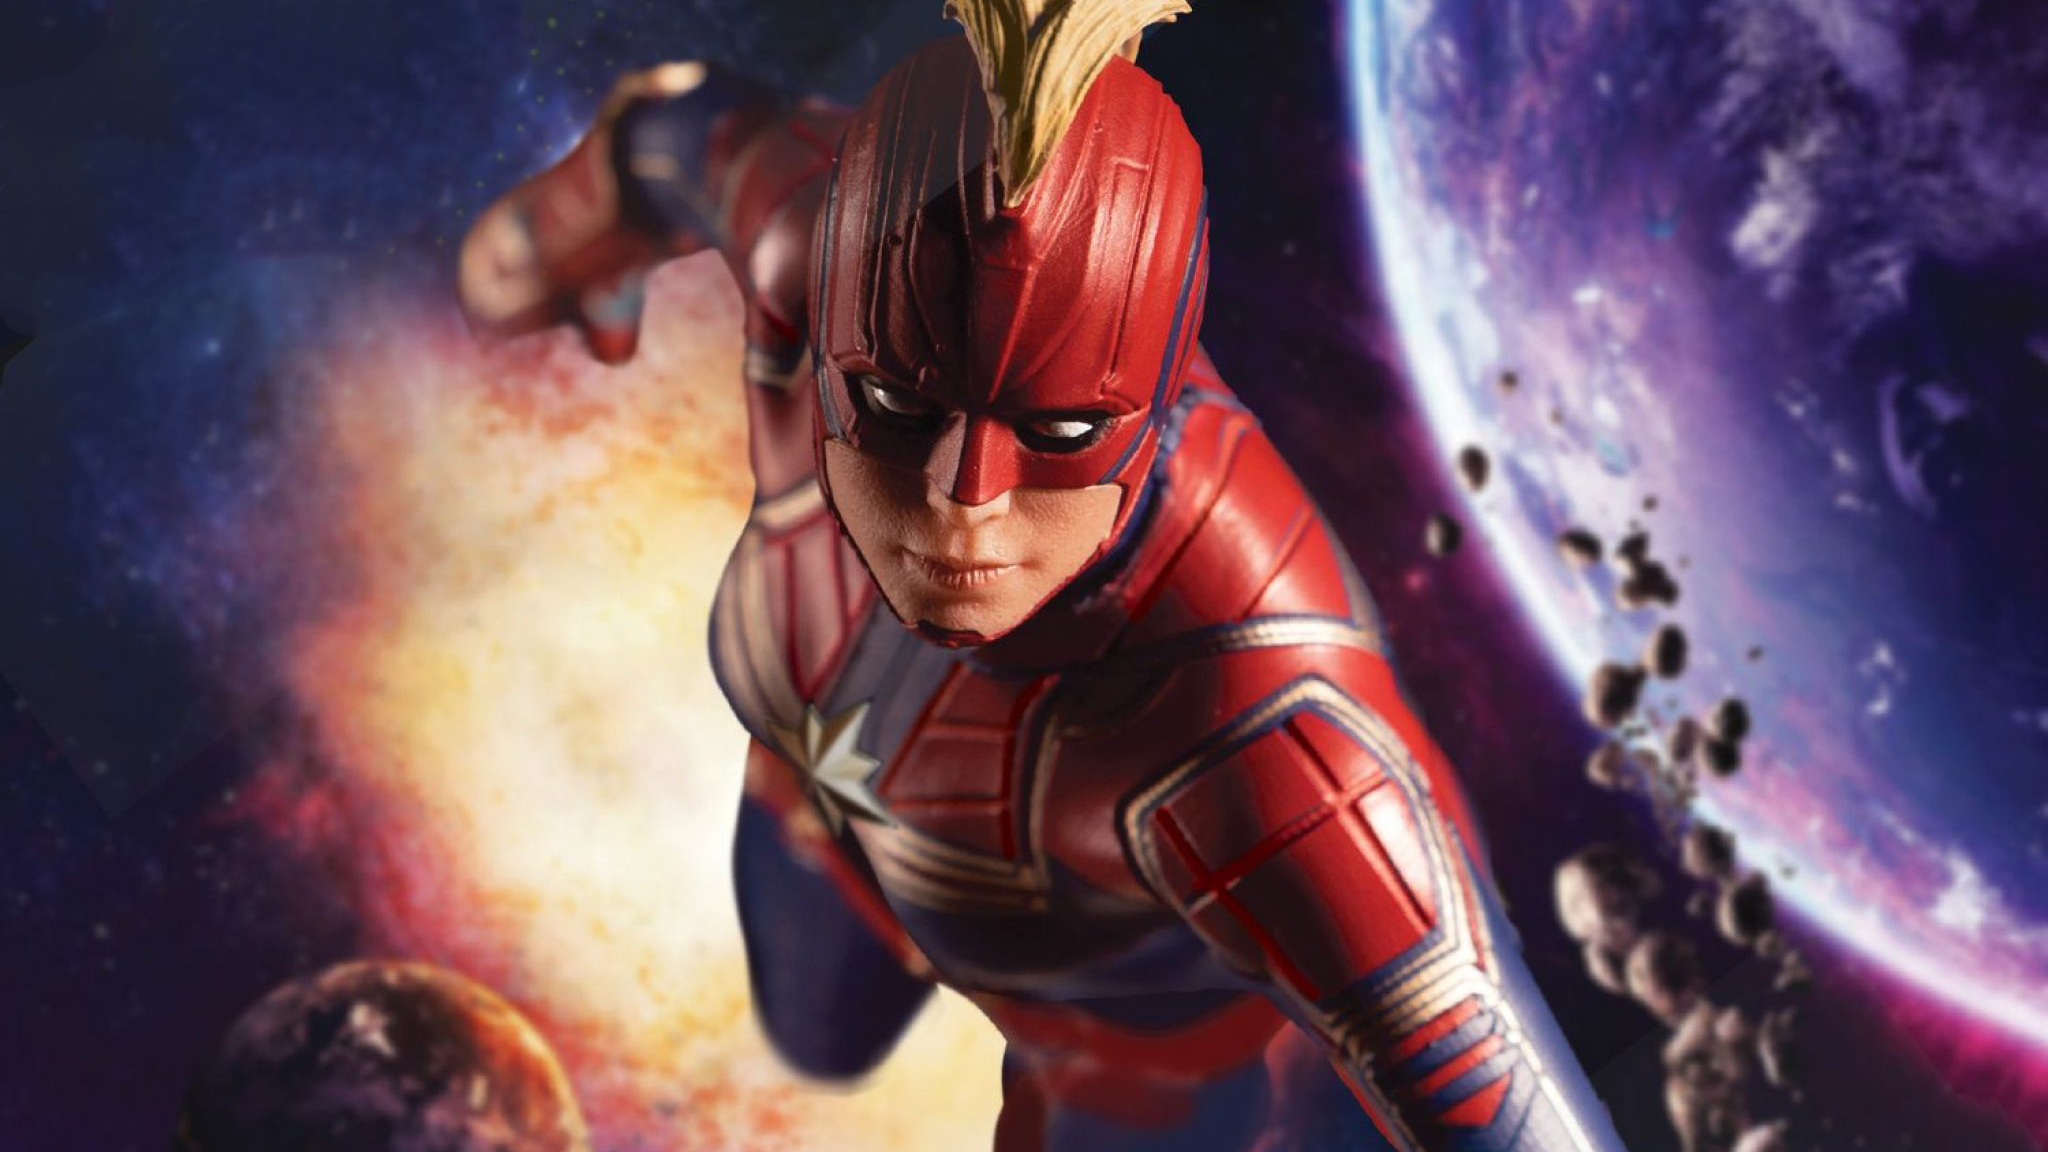 download the new version Captain Marvel